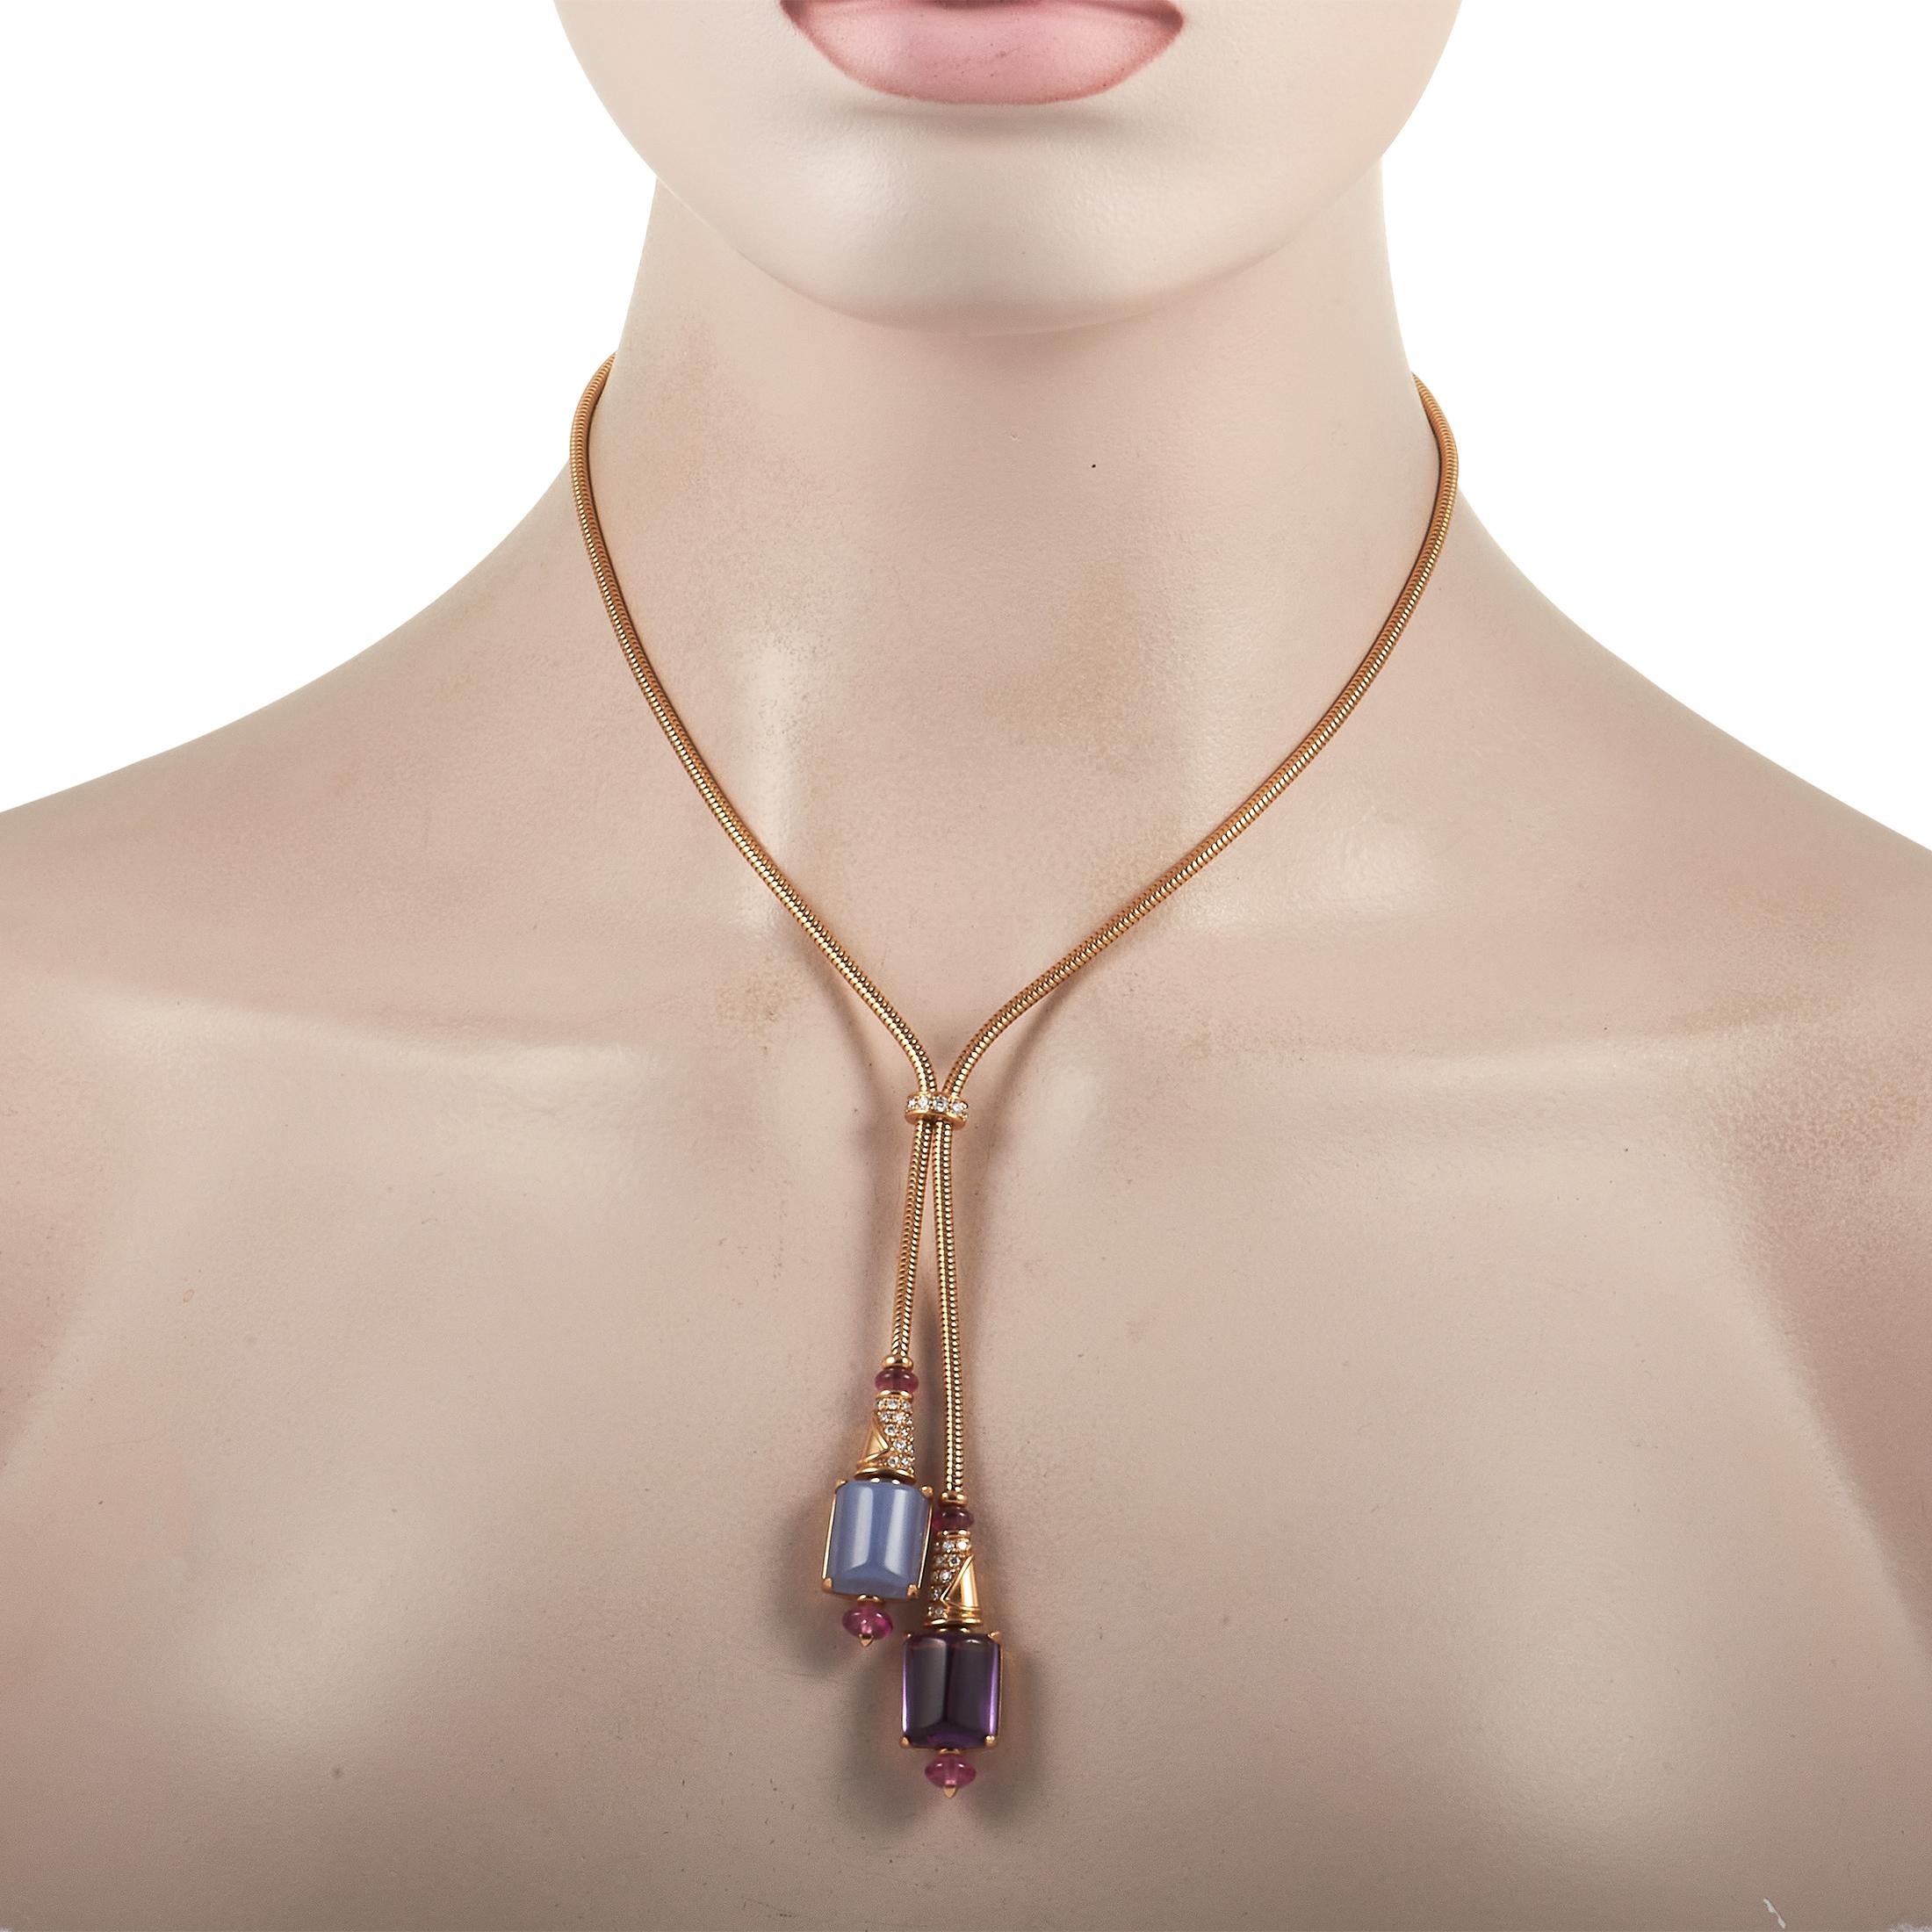 You’ll always make a statement when you have on this remarkable necklace from Bvlgari. Suspended from a sleek 18K Rose Gold chain measuring 16” long, you’ll find a dramatic pair of pendants that together measure 3.75” long and 0.75” wide.